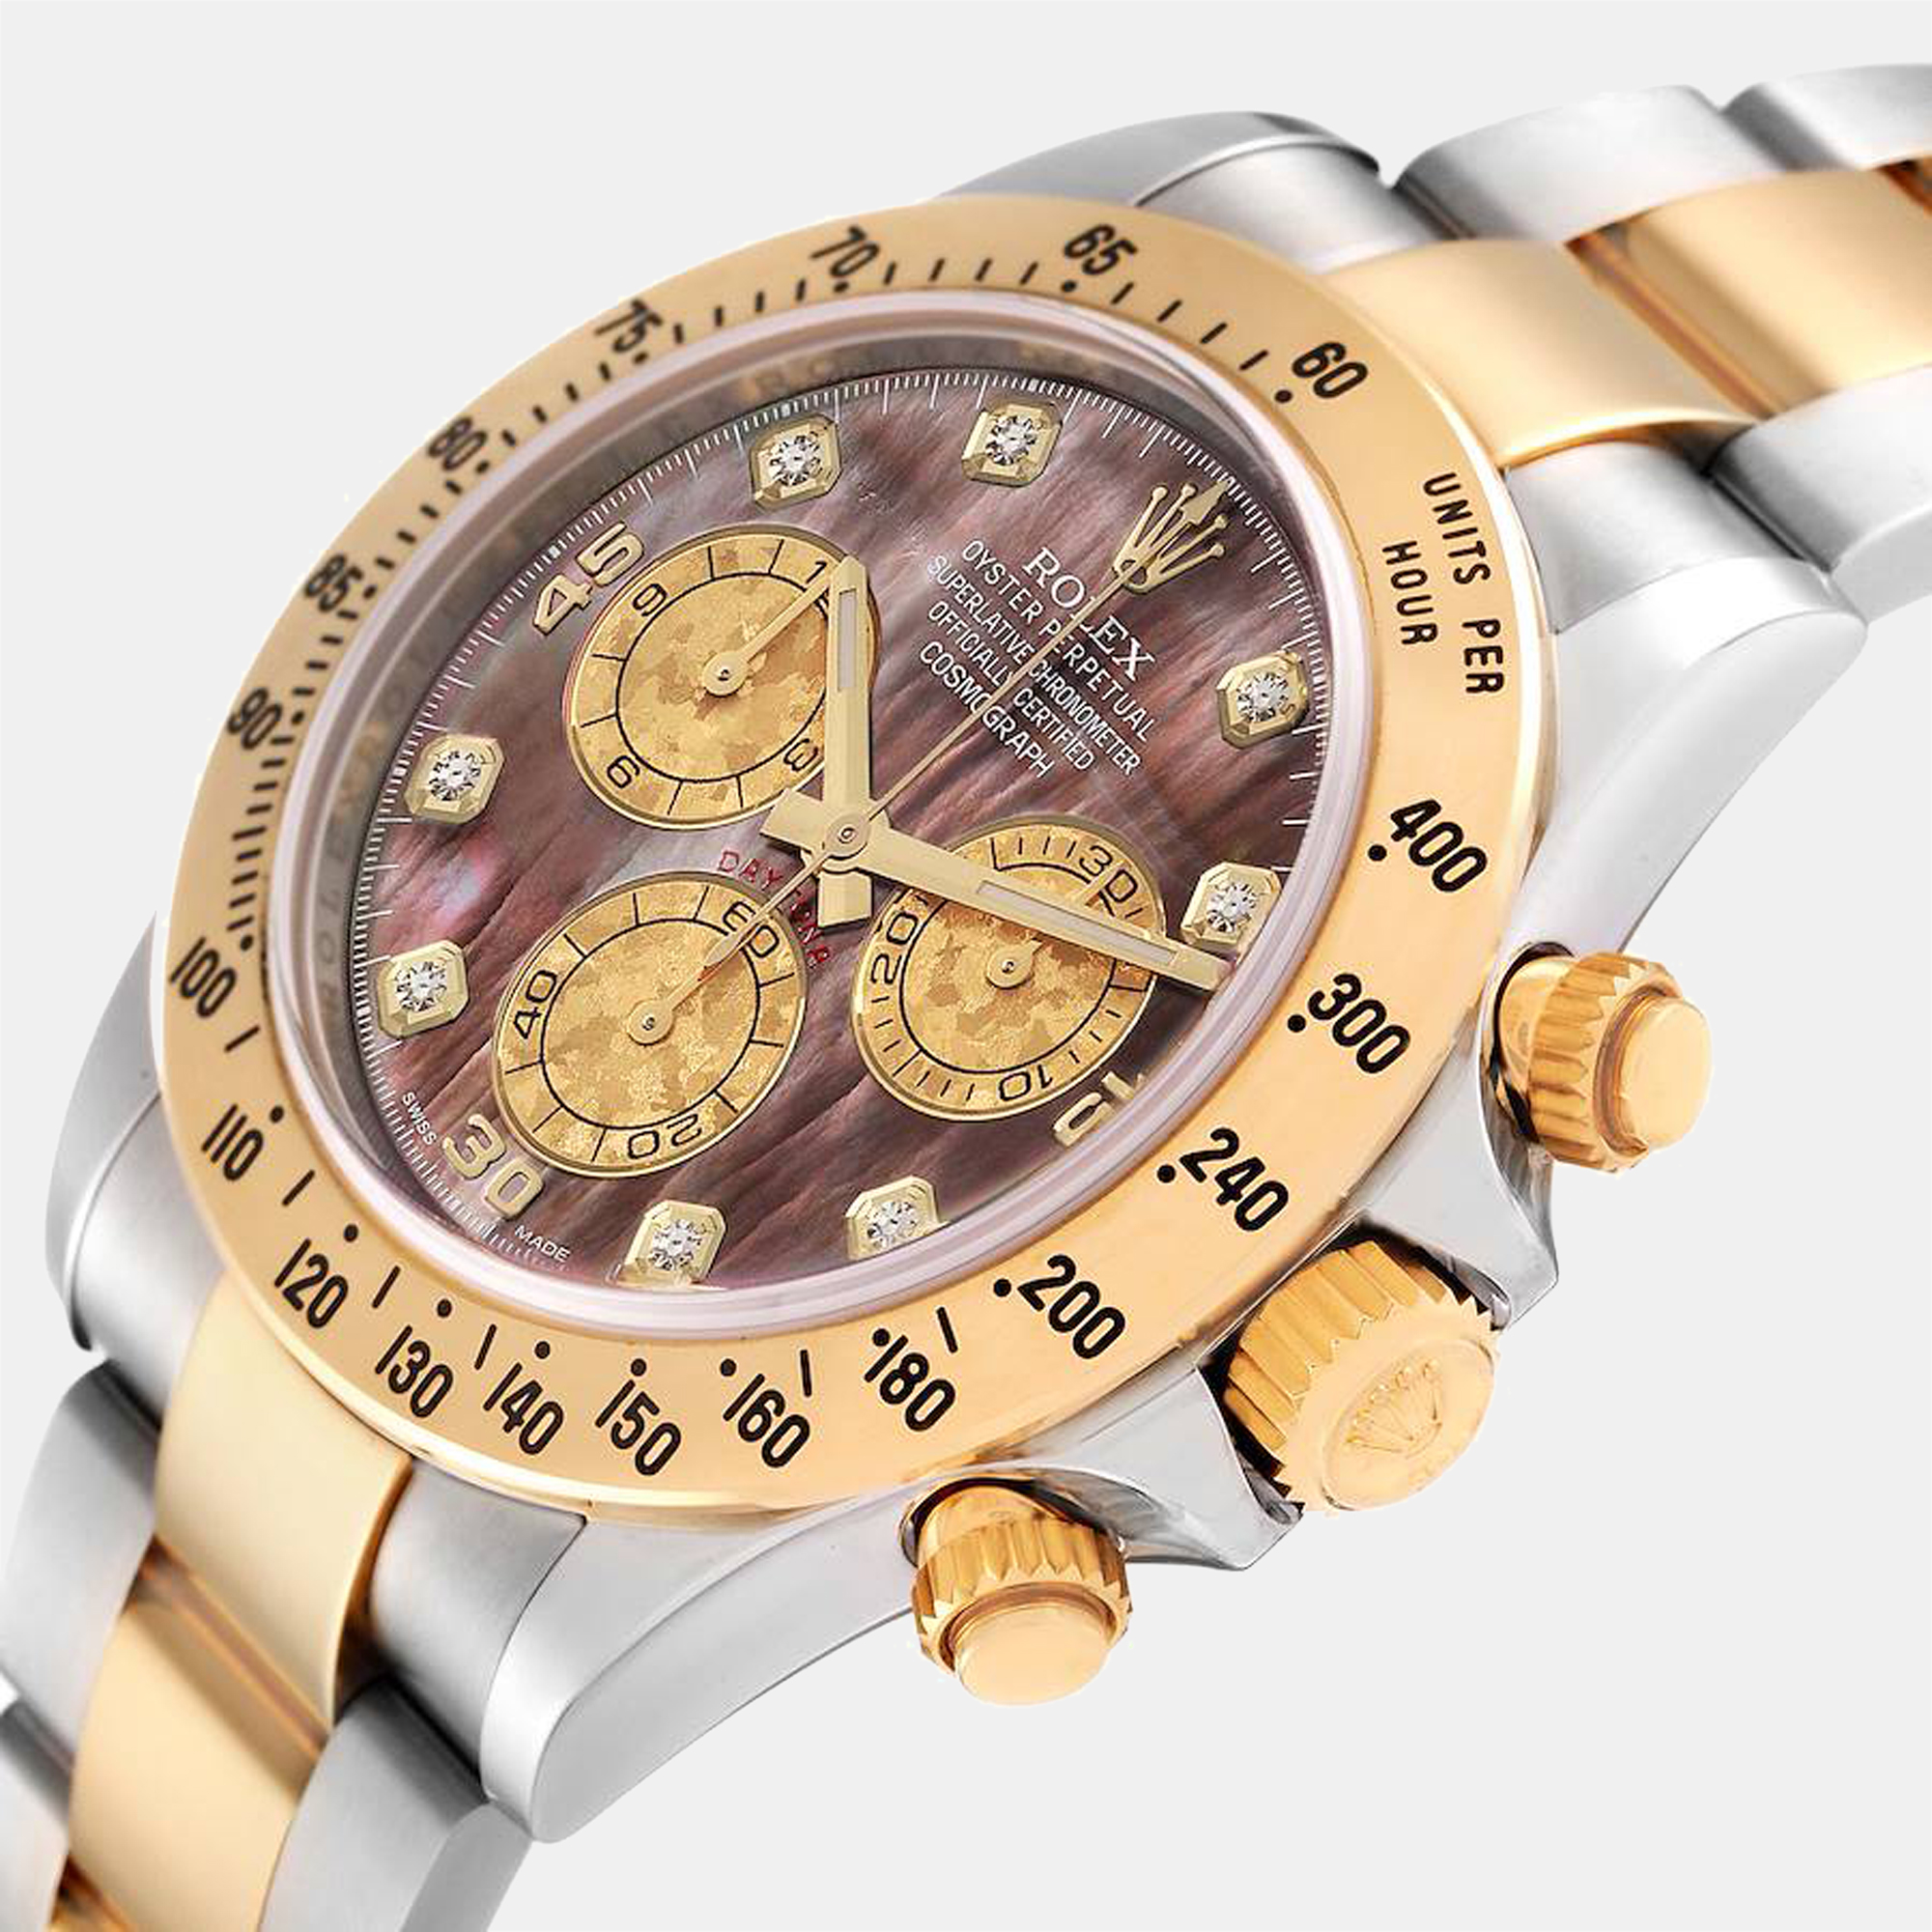 

Rolex MOP Diamonds 18K Yellow Gold And Stainless Steel Cosmograph Daytona 116523 Automatic Men's Wristwatch 40 mm, Brown